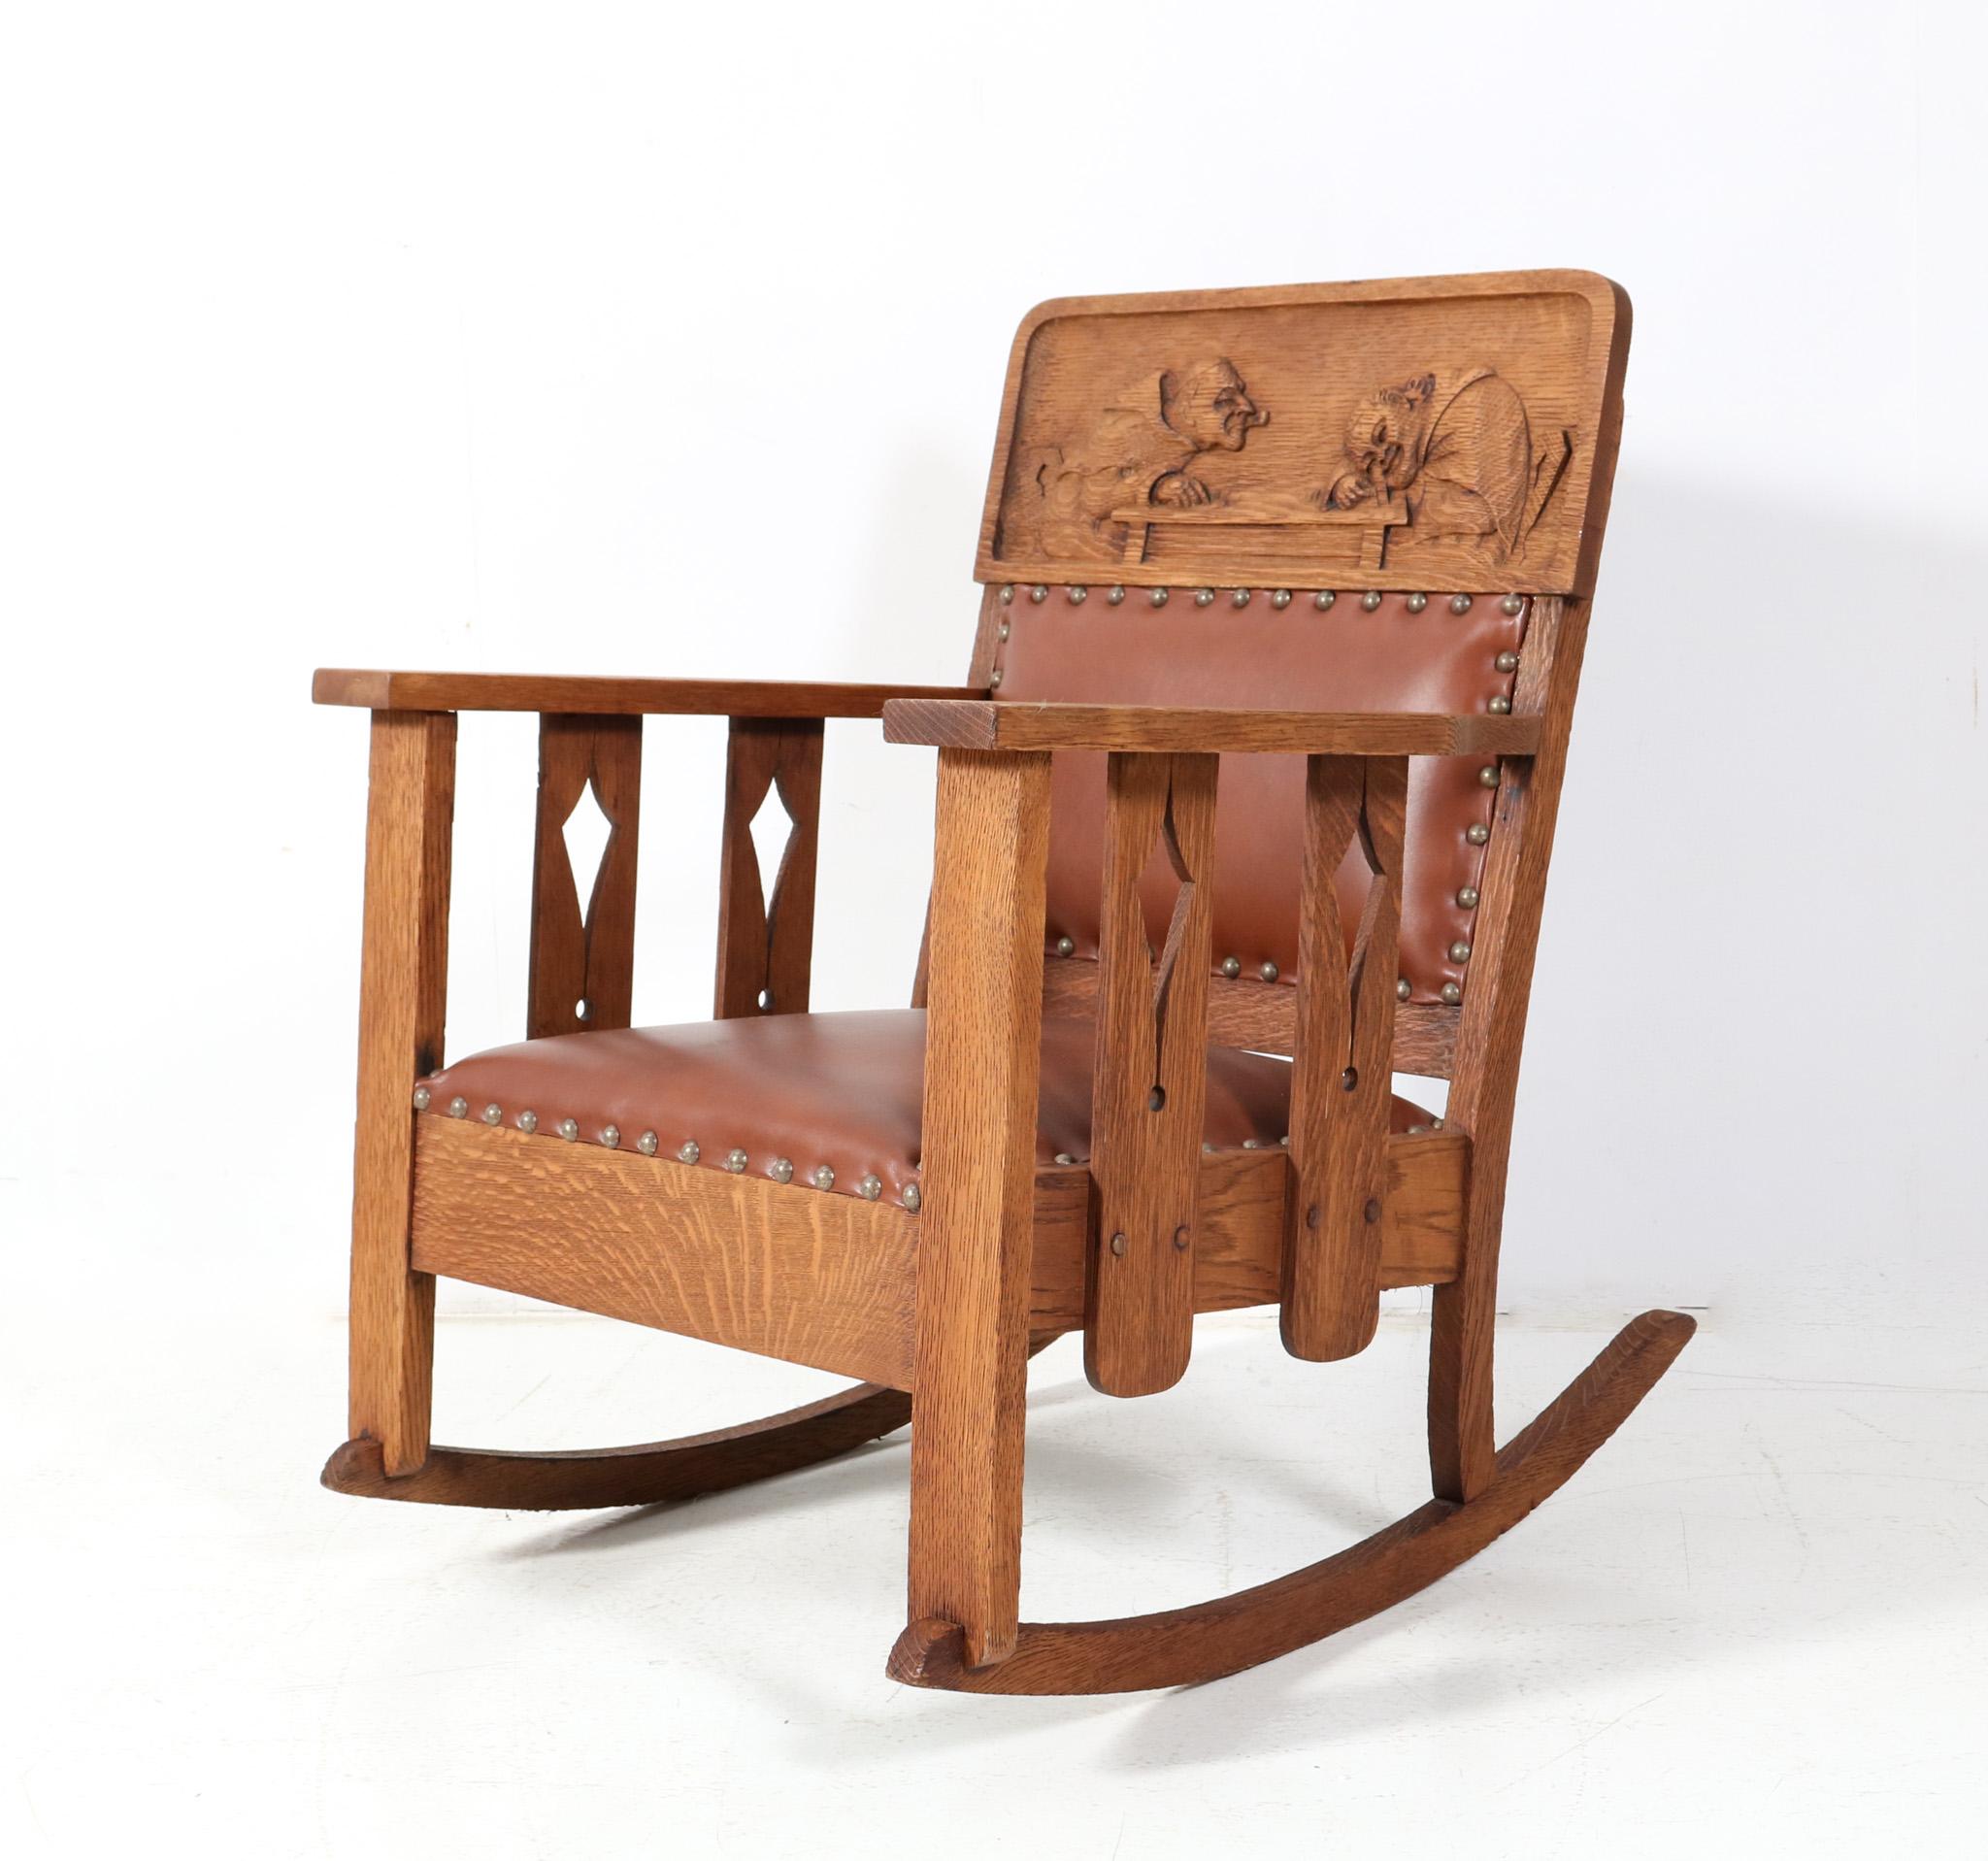 Magnificent and rare Arts & Crafts Mission rocking chair.
Striking American design from the 1900s.
Quarter-sawn oak frame with two hand-carved monks in the back rest.
The rocking chair has been re-upholstered with a high quality and thick brown